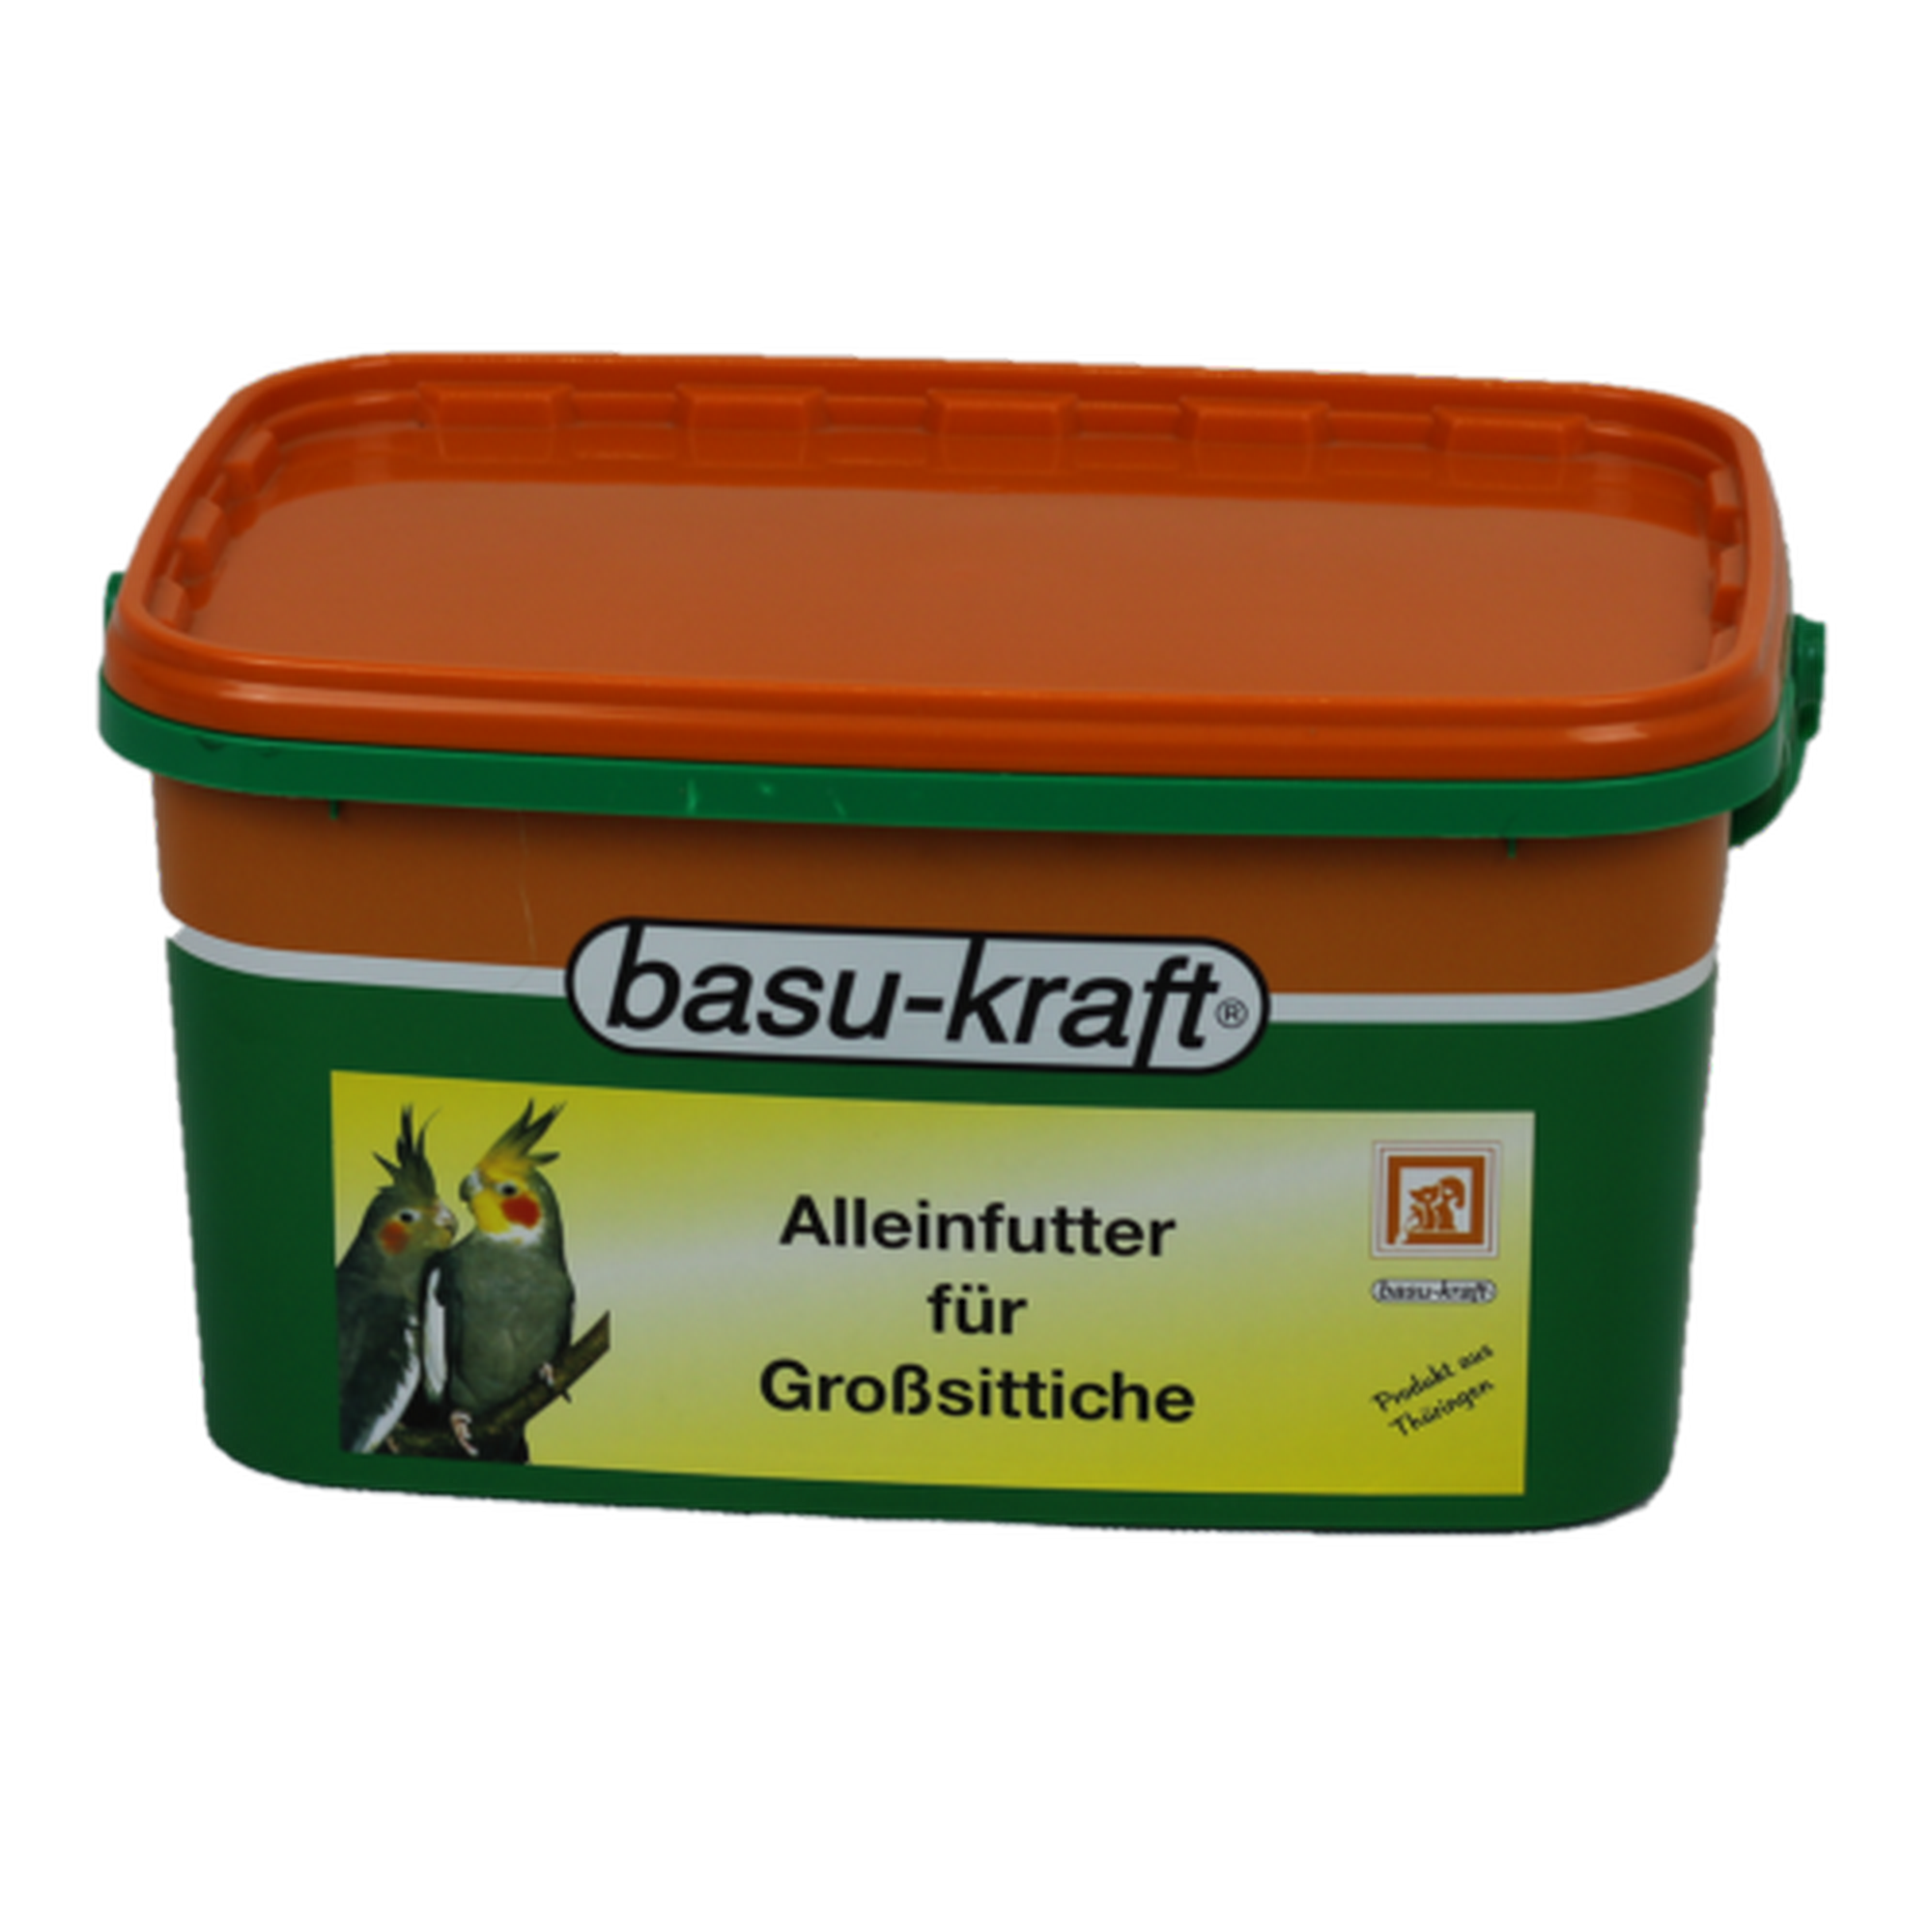 Großsittichfutter 2,6 kg + product picture